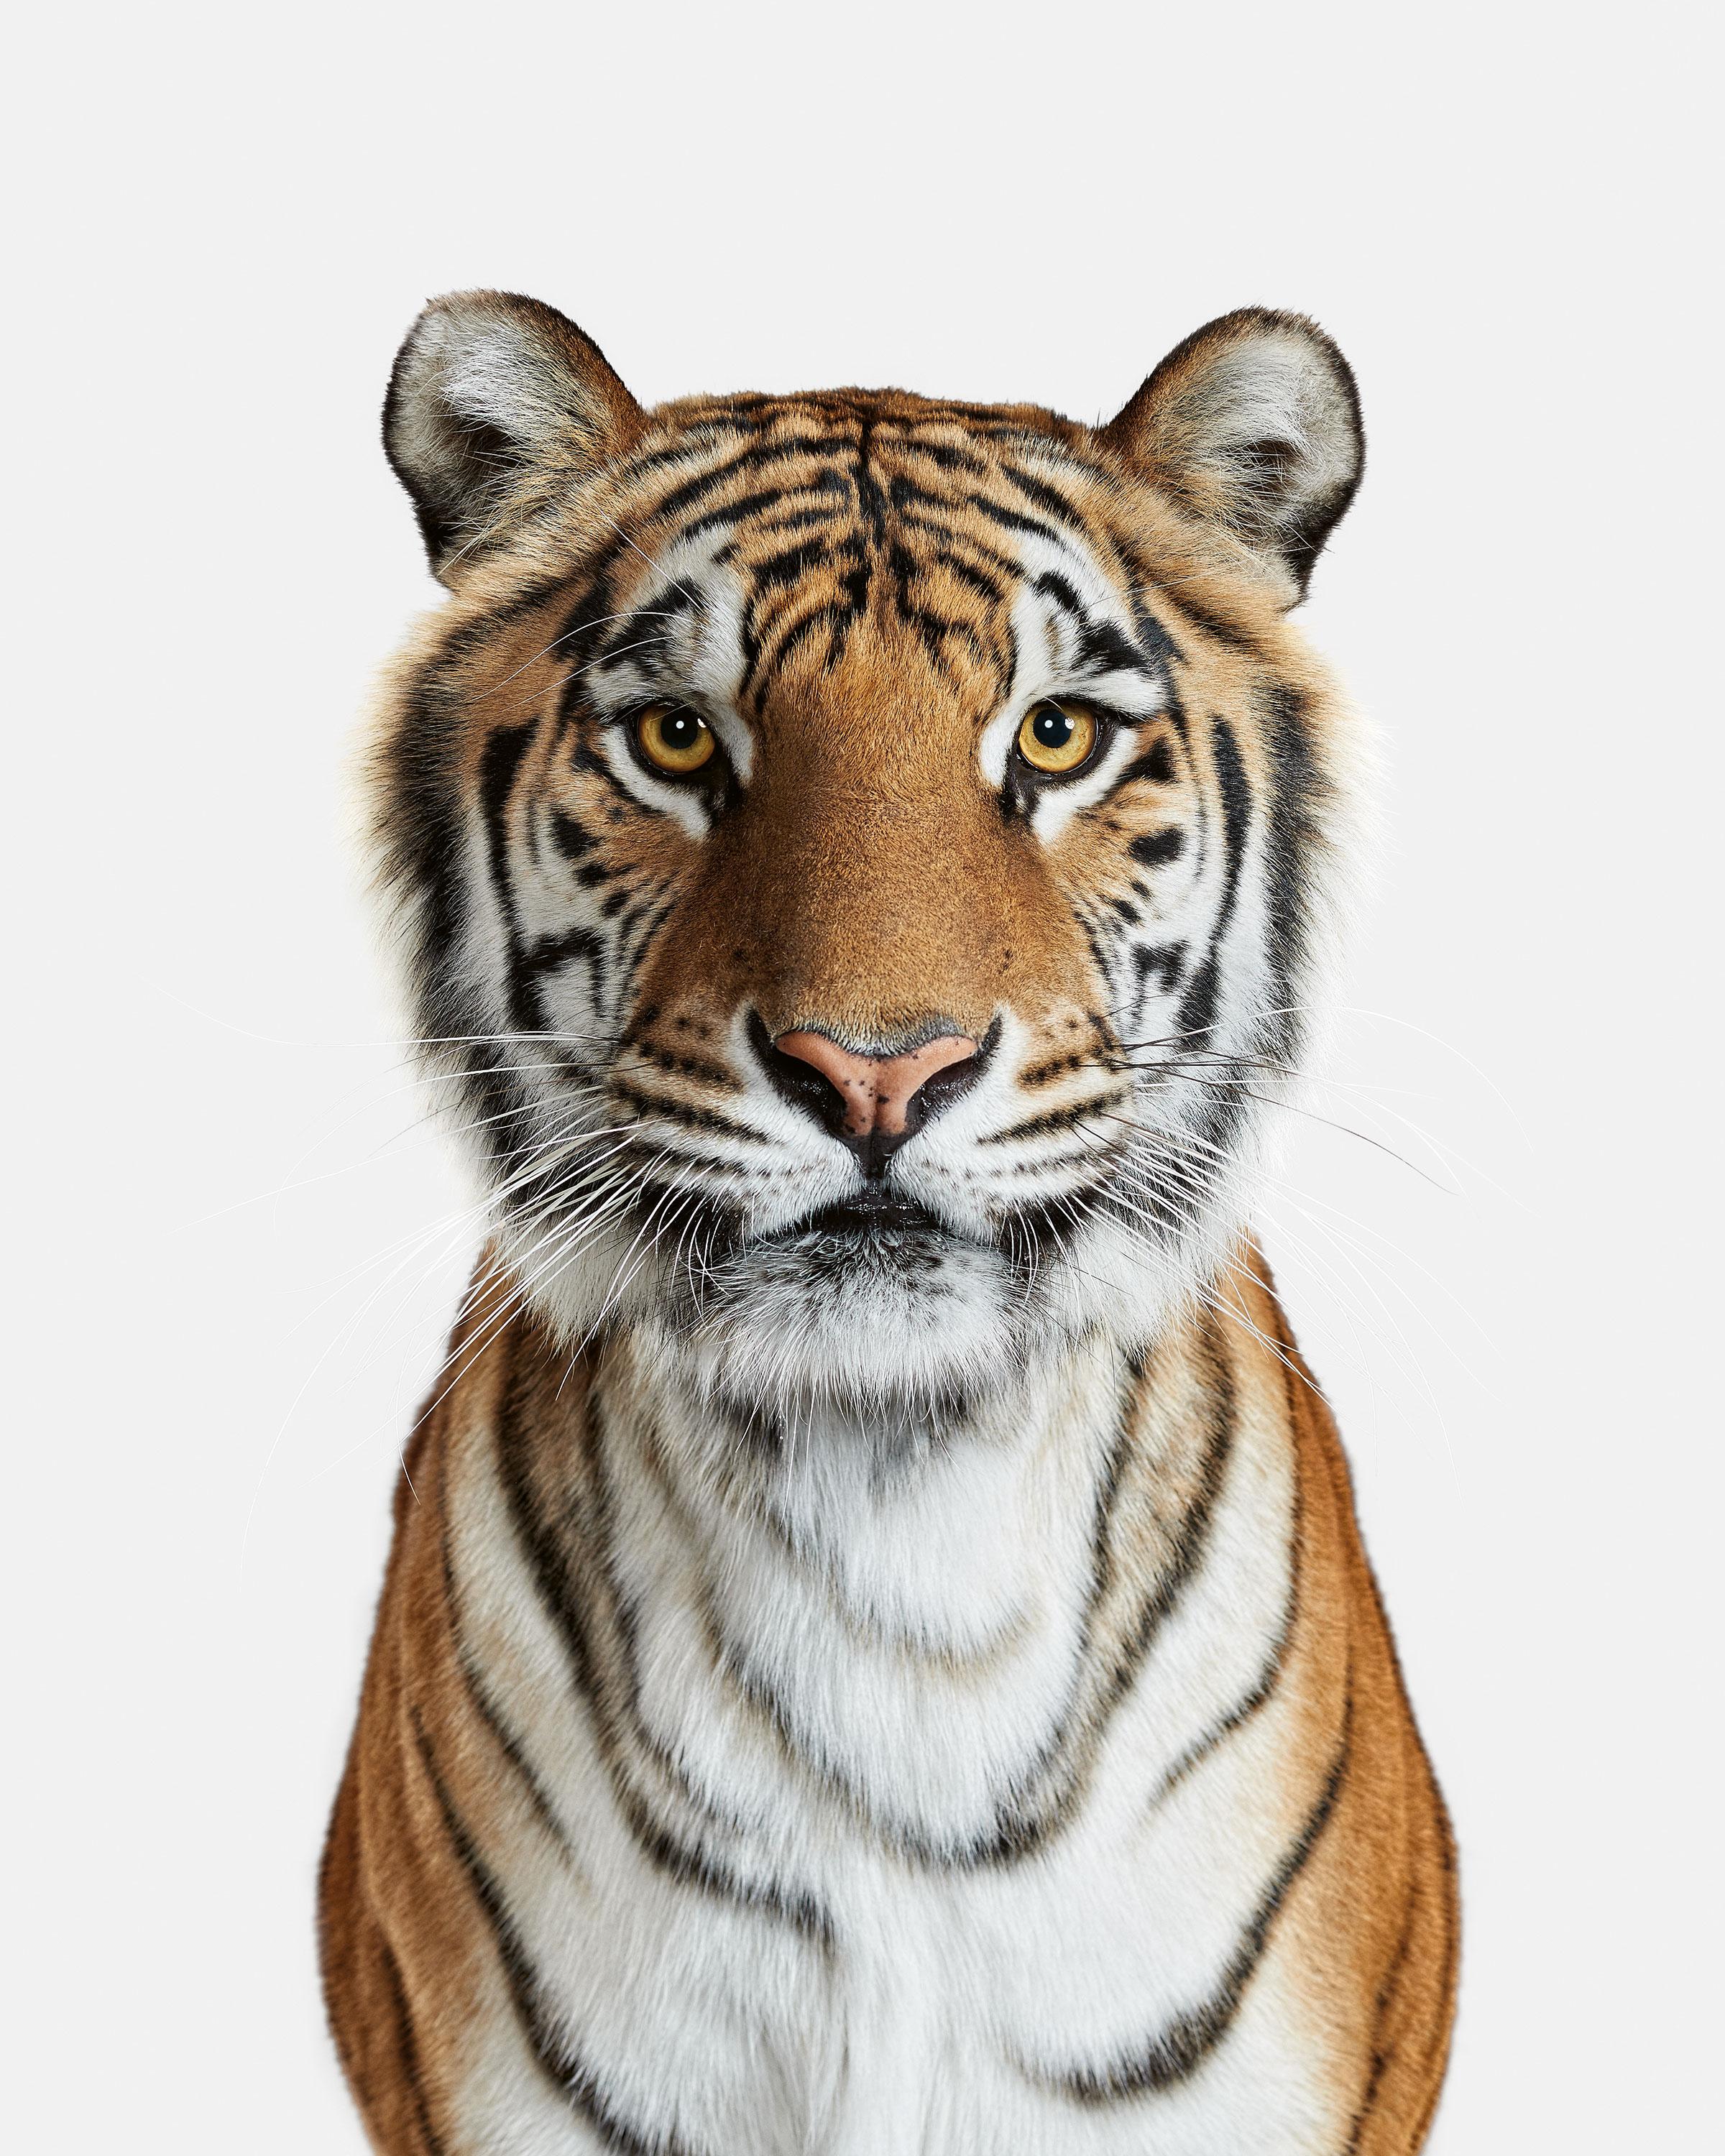 Randal Ford - Bengal Tiger No. 1, Photography 2018, Printed After